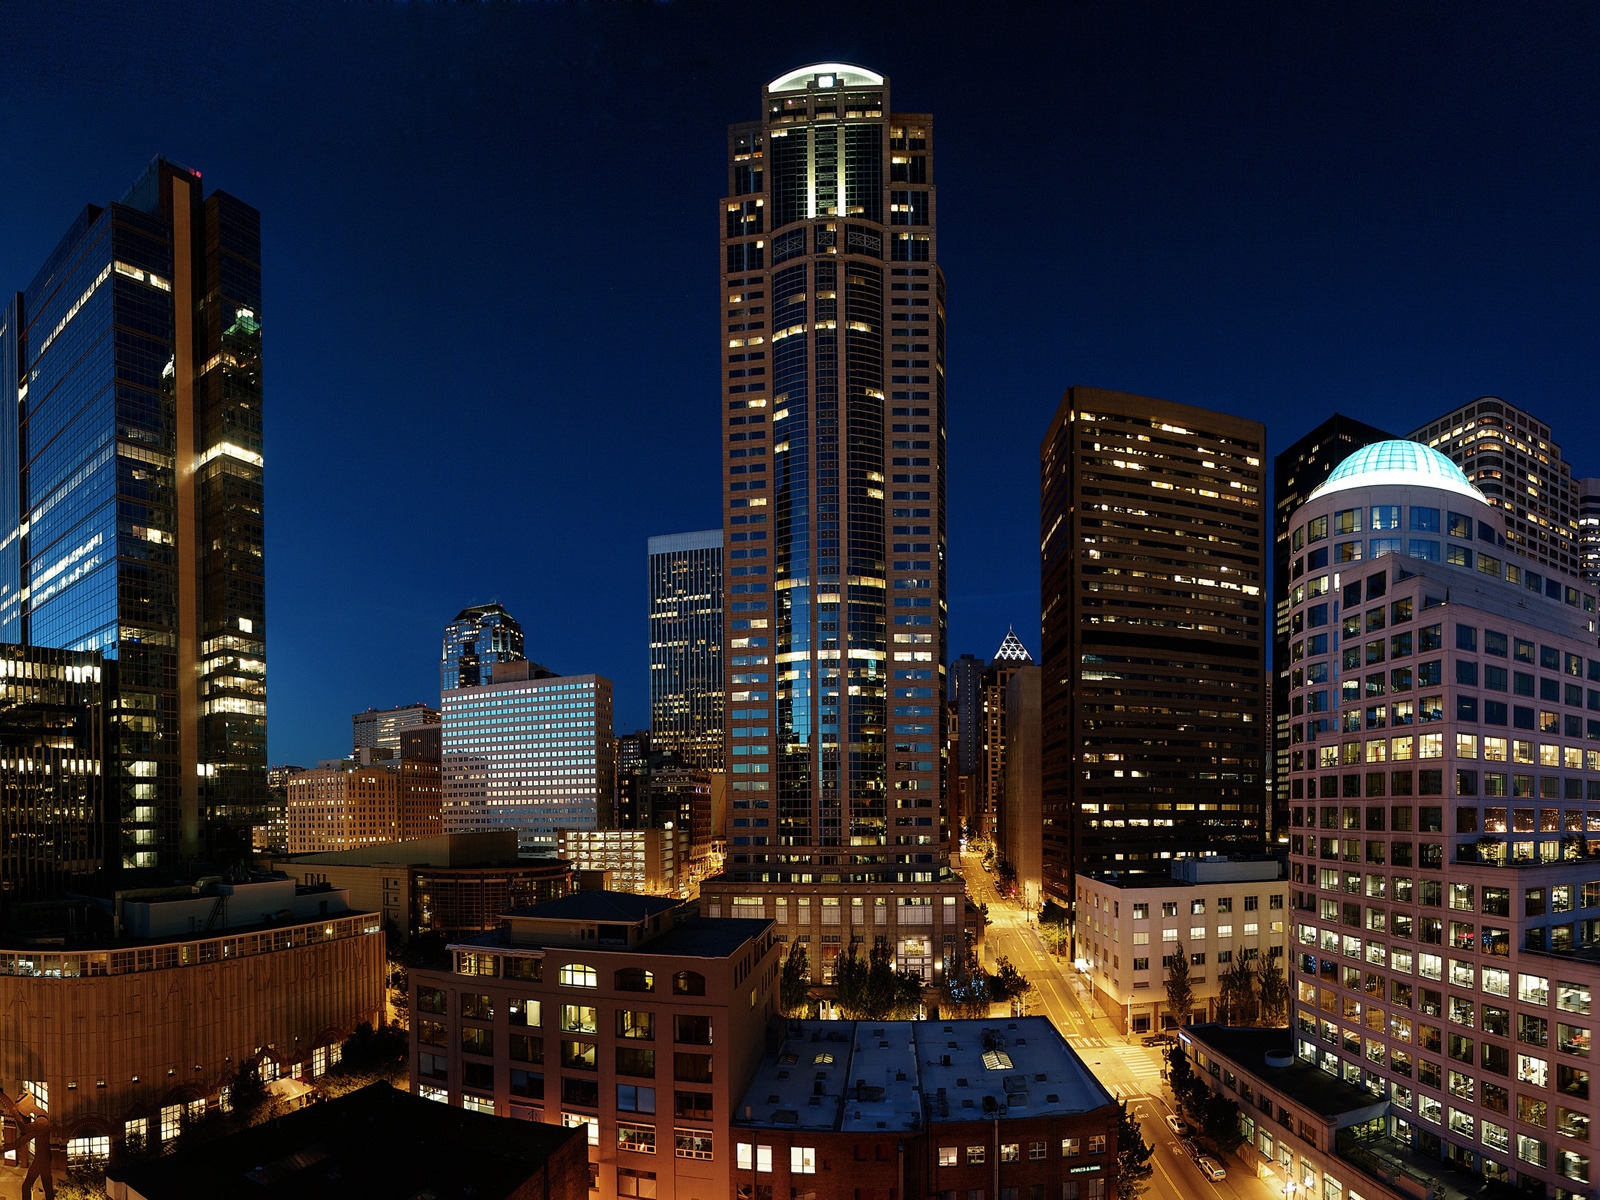 Seattle Night Lights for 1600 x 1200 resolution